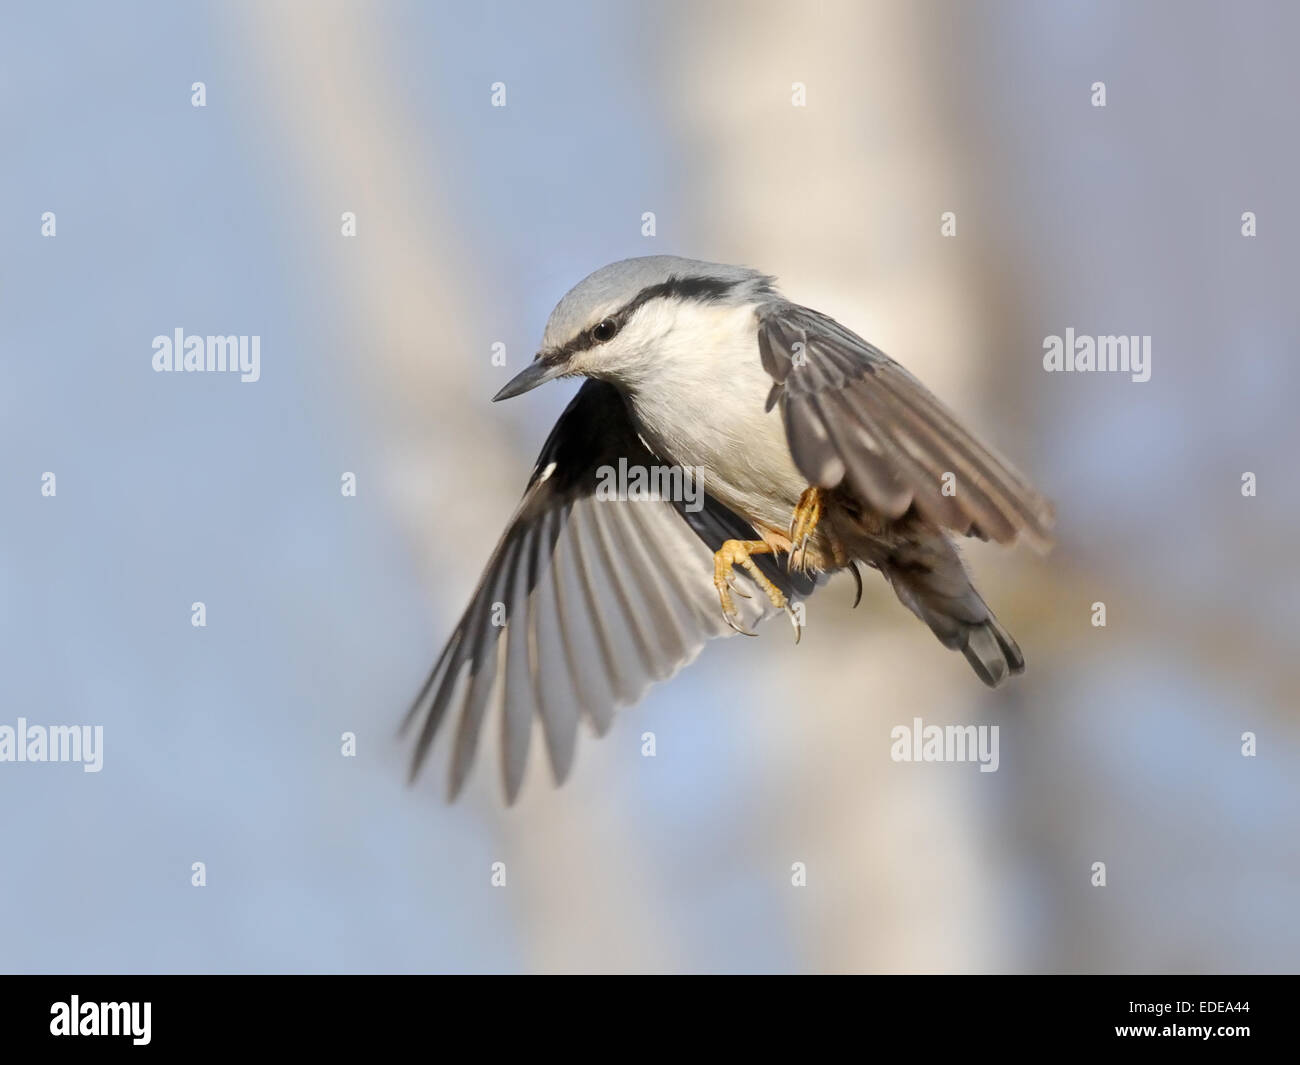 Serious flying Nuthatch with down wings against blue and white autumn background. Stock Photo